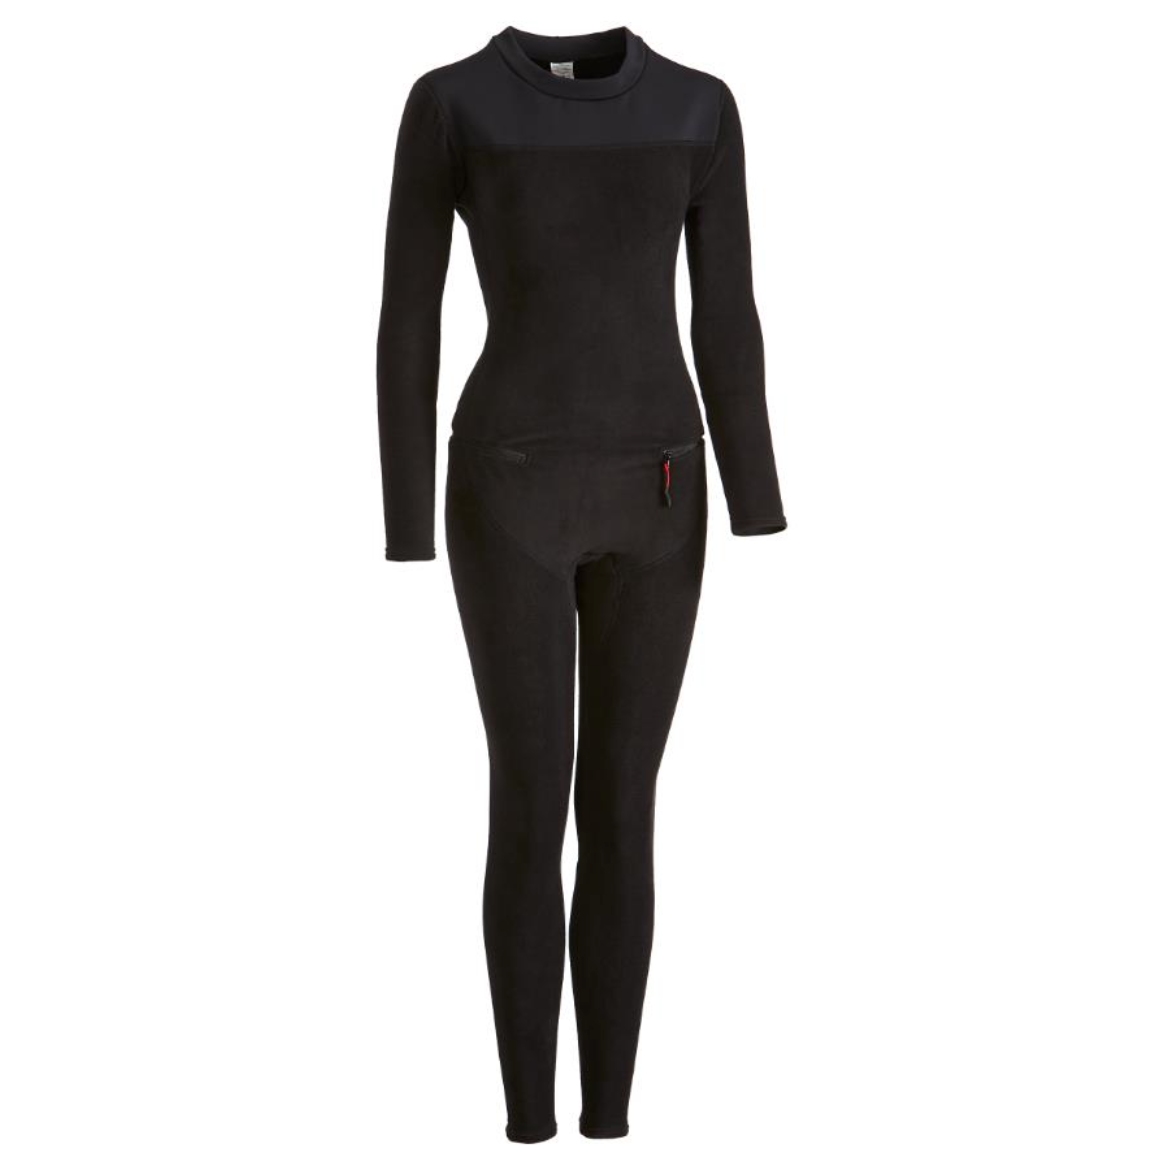 Immersion Research Women's Thick Skin Union Suit with Zipper